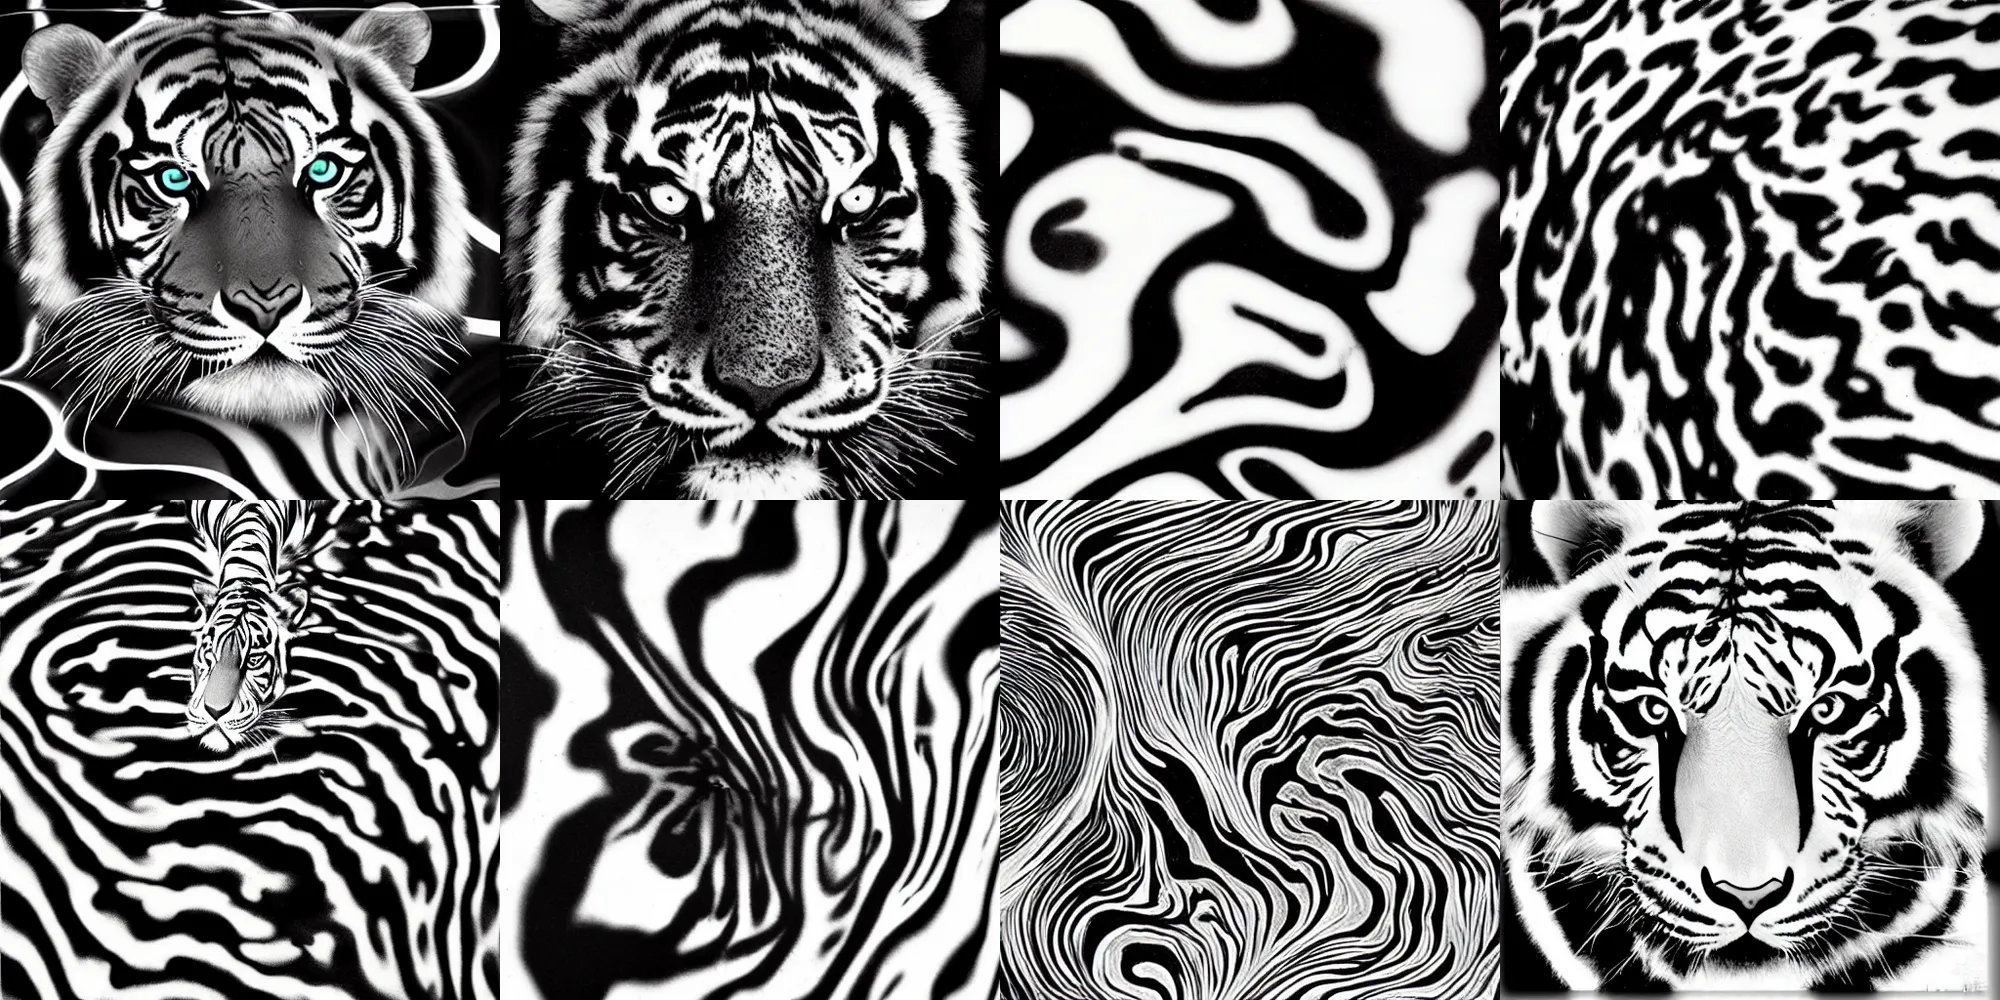 Prompt: reaction diffusion, water, abstract, liquid, swirly, black and white tiger, ink, latte art